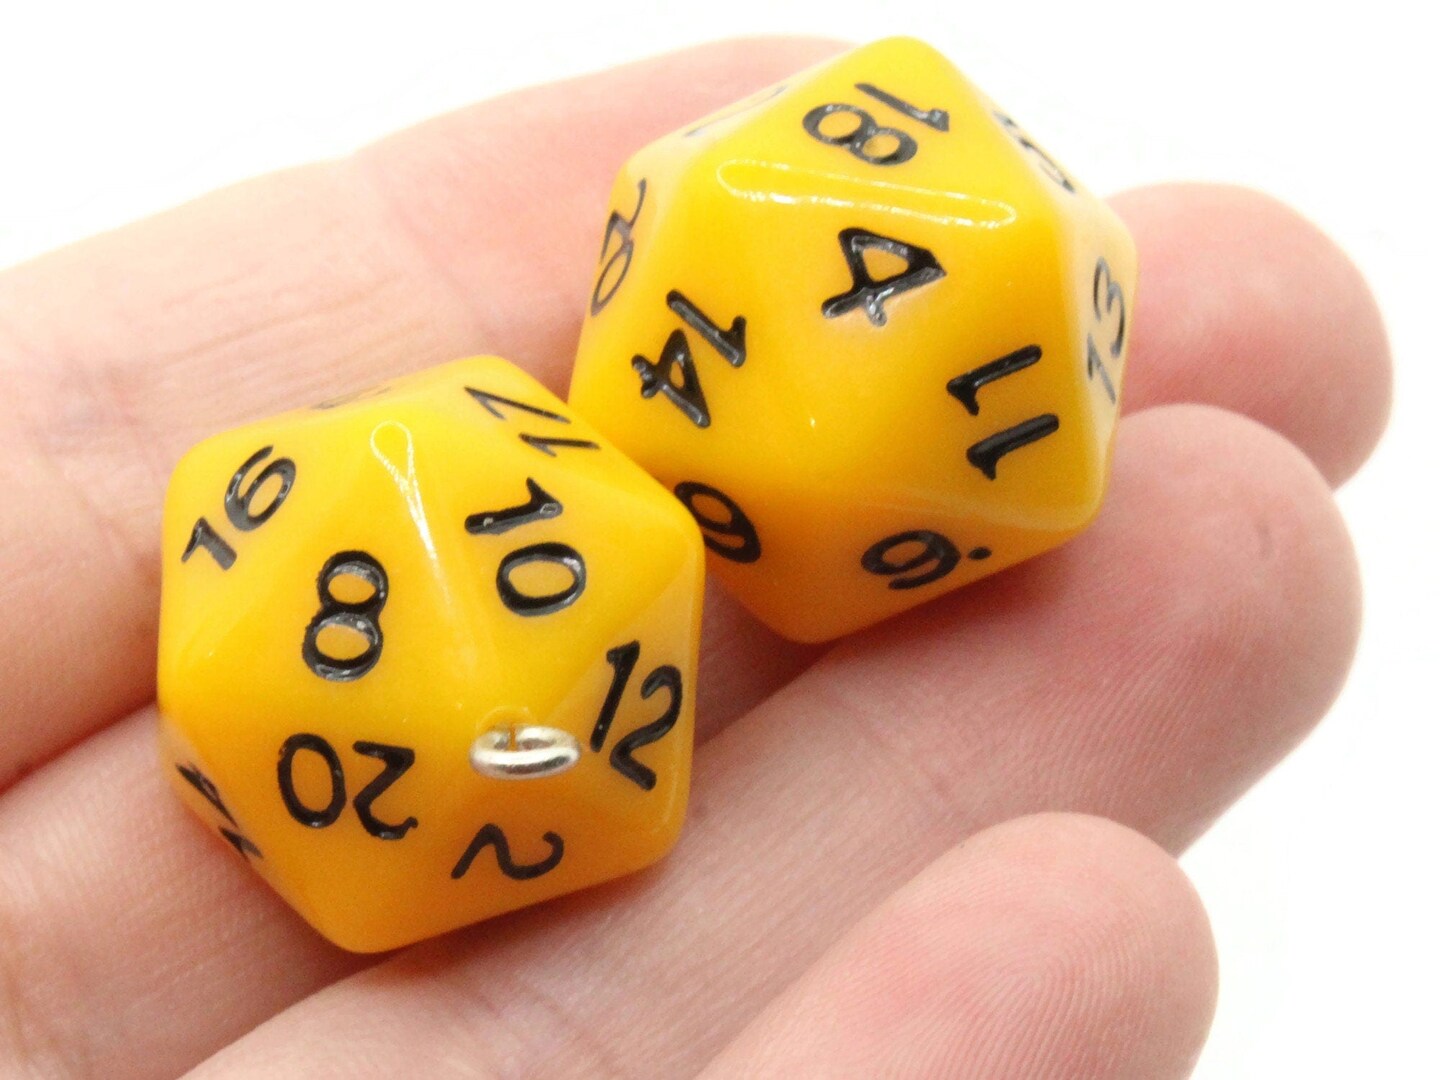 2 20mm Yellow Resin D20 20 Sided Dice Charms